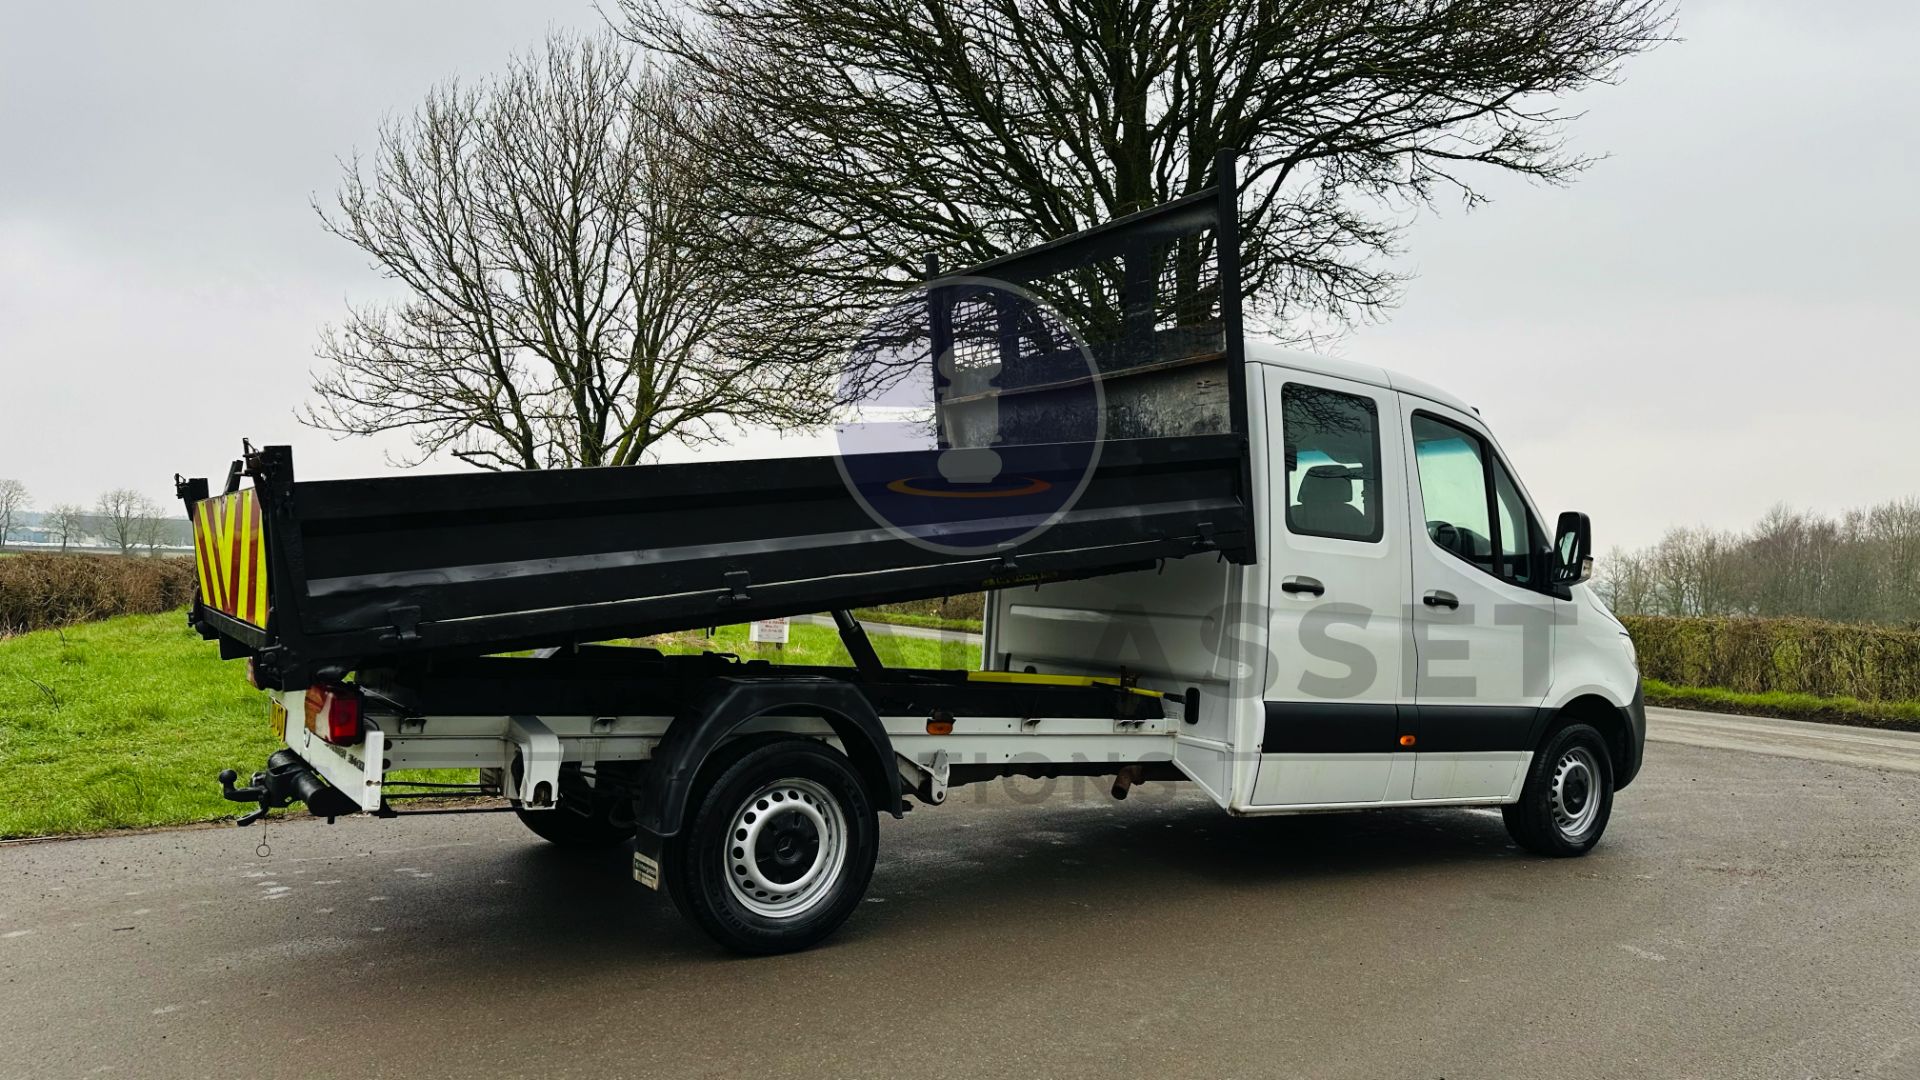 (On Sale) MERCEDES-BENZ SPRINTER 314 CDI *LWB - 7 SEATER D/CAB TIPPER* (2019 - NEW MODEL) *EURO 6* - Image 15 of 38